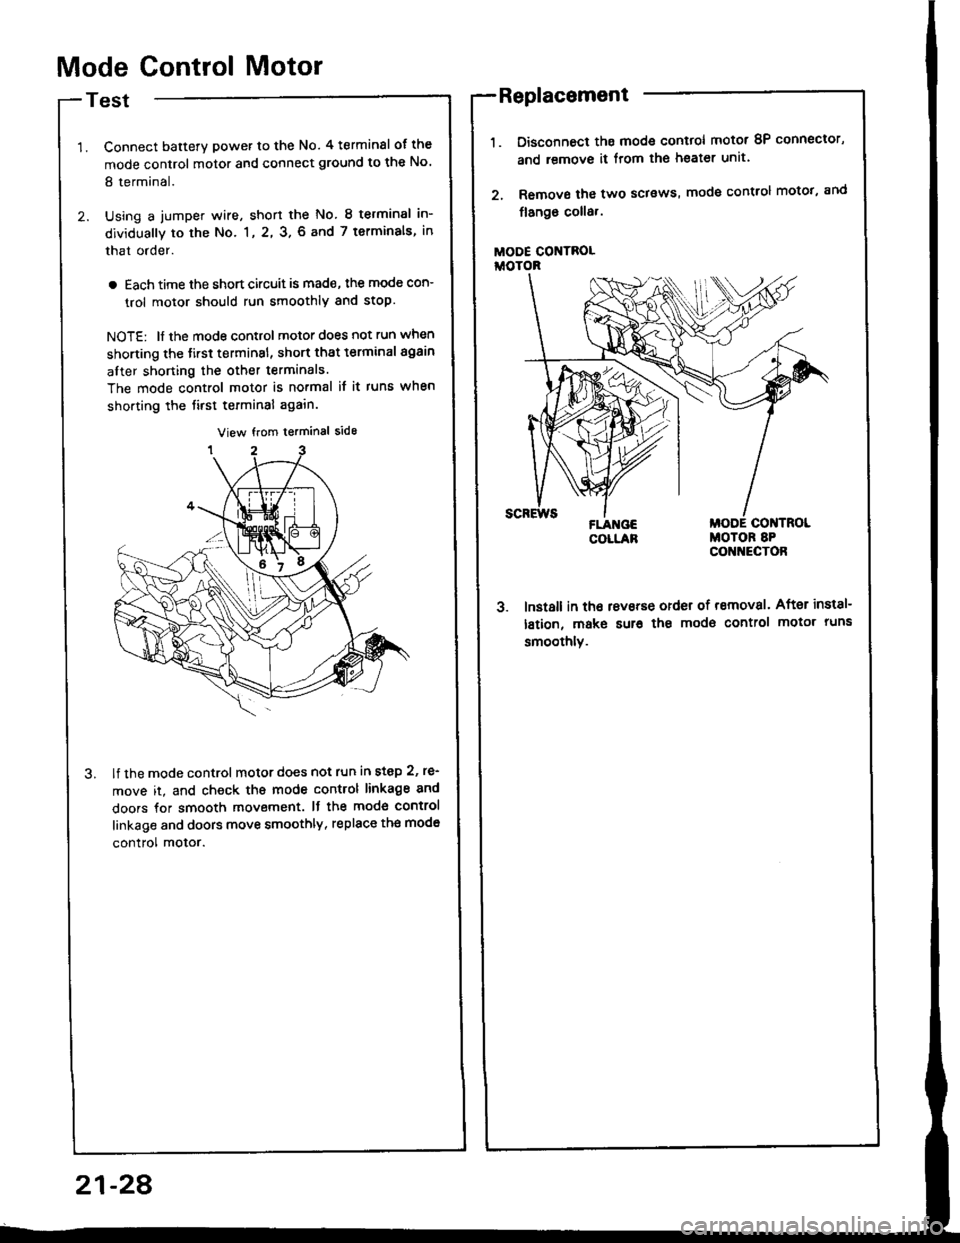 HONDA INTEGRA 1994 4.G Service Manual Mode Control Motor
Test
Connect batterY power to the No. 4 terminsl of the
mode control motor and connect ground to the No
8 terminal.
Using a jumper wire, short the No. 8 terminsl in-
dividually to 